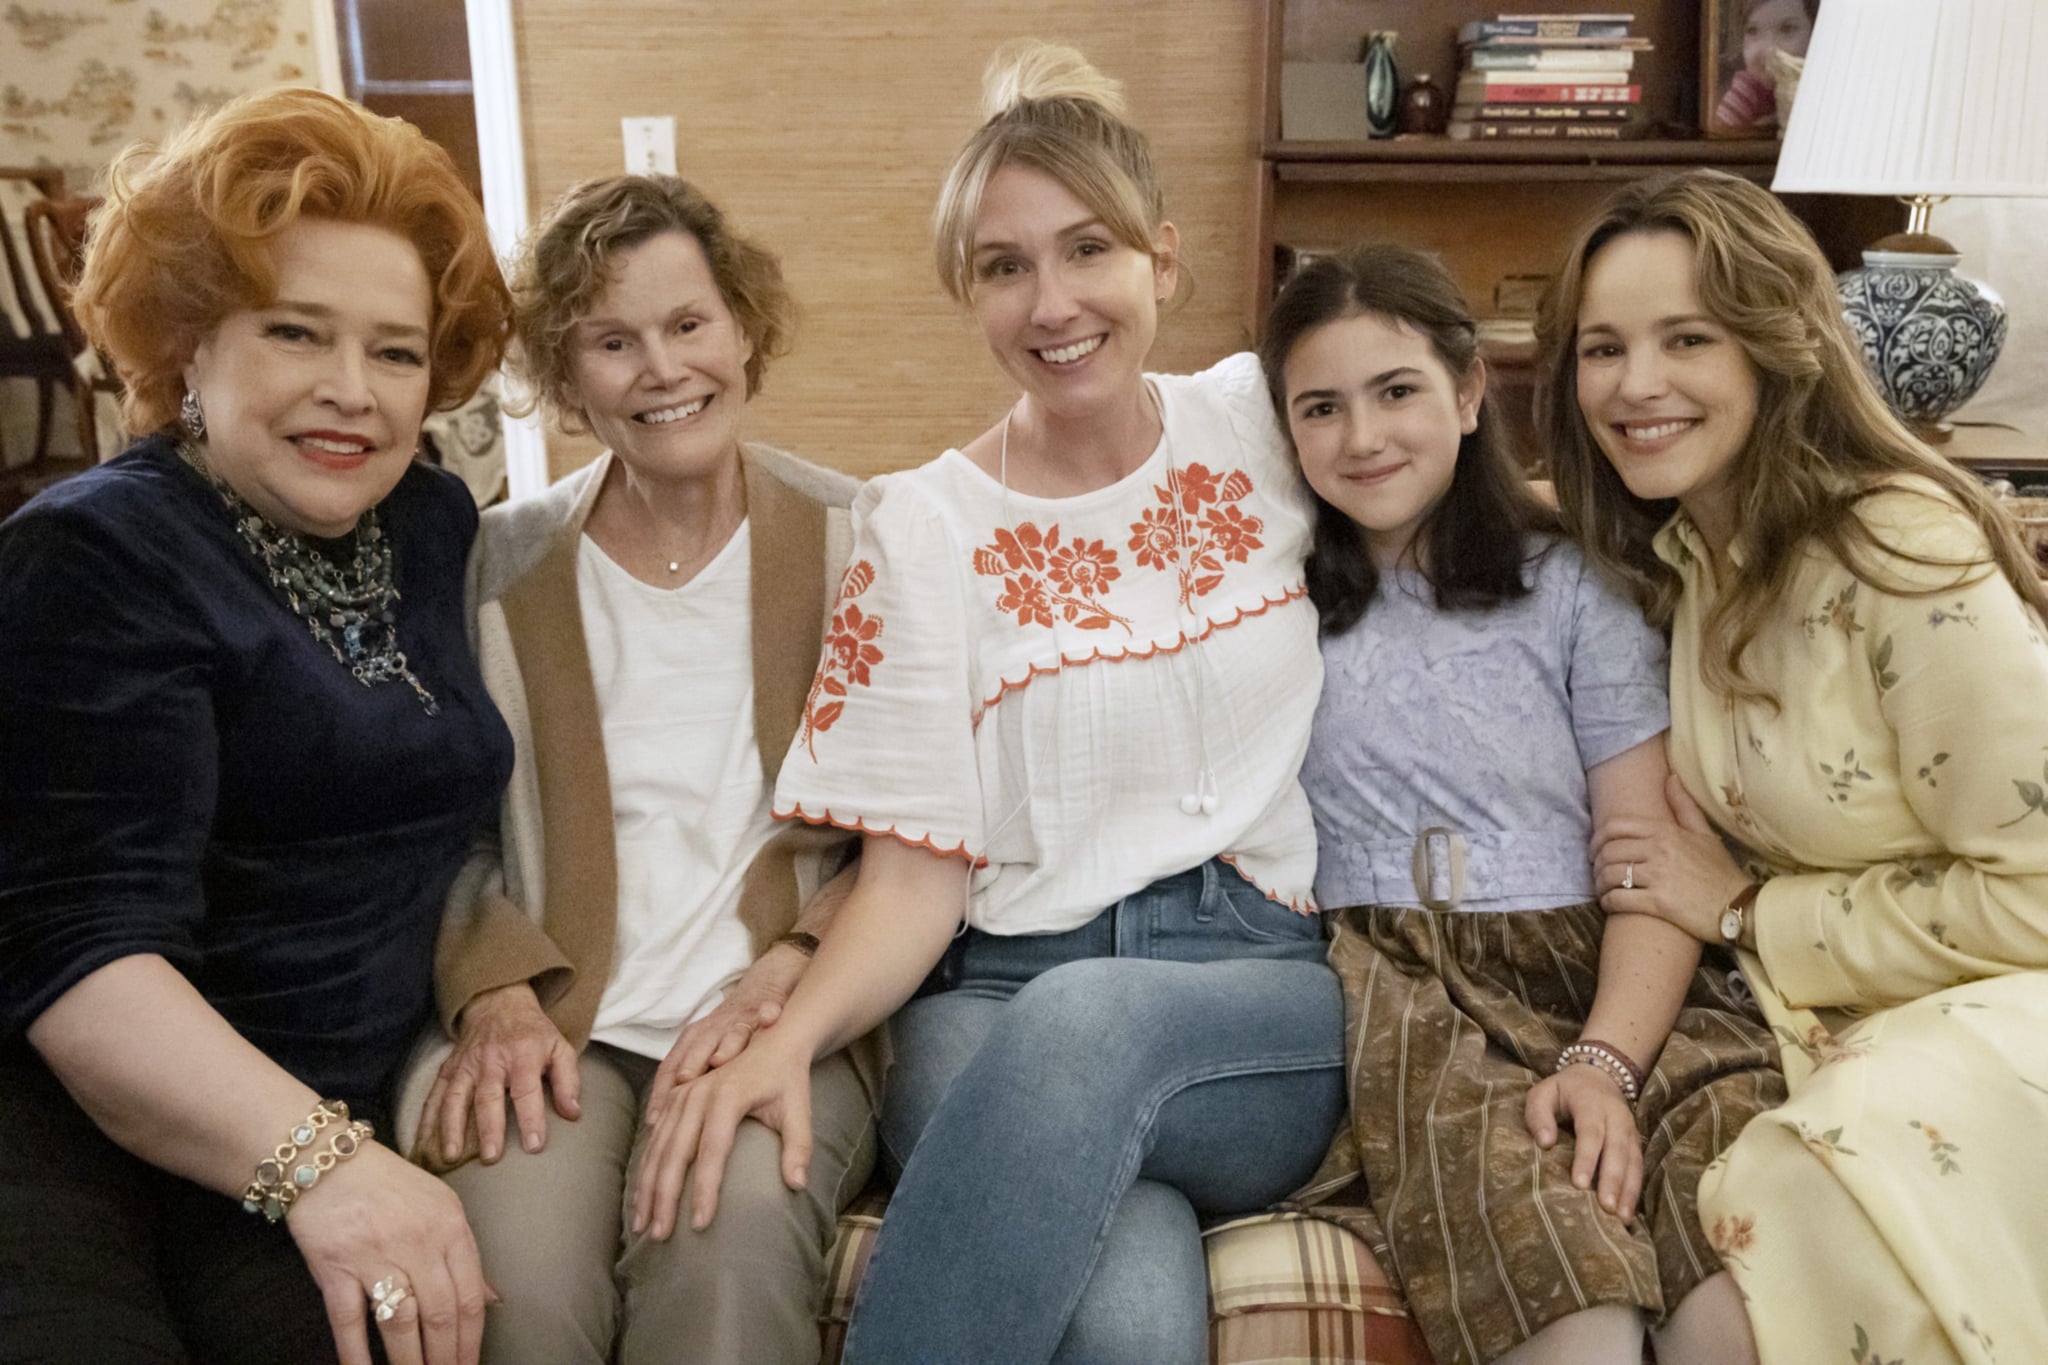 ARE YOU THERE GOD?  IT'S ME, MARGARET., (aka ARE YOU THERE GOD? IT'S ME, MARGARET), from left: Kathy Bates, writer Judy Blume, director Kelly Fremon Craig, Abby Ryder Fortson, Rachel McAdams , on set, 2023. ph: Dana Hawley/Lionsgate/Courtesy Everett Collection